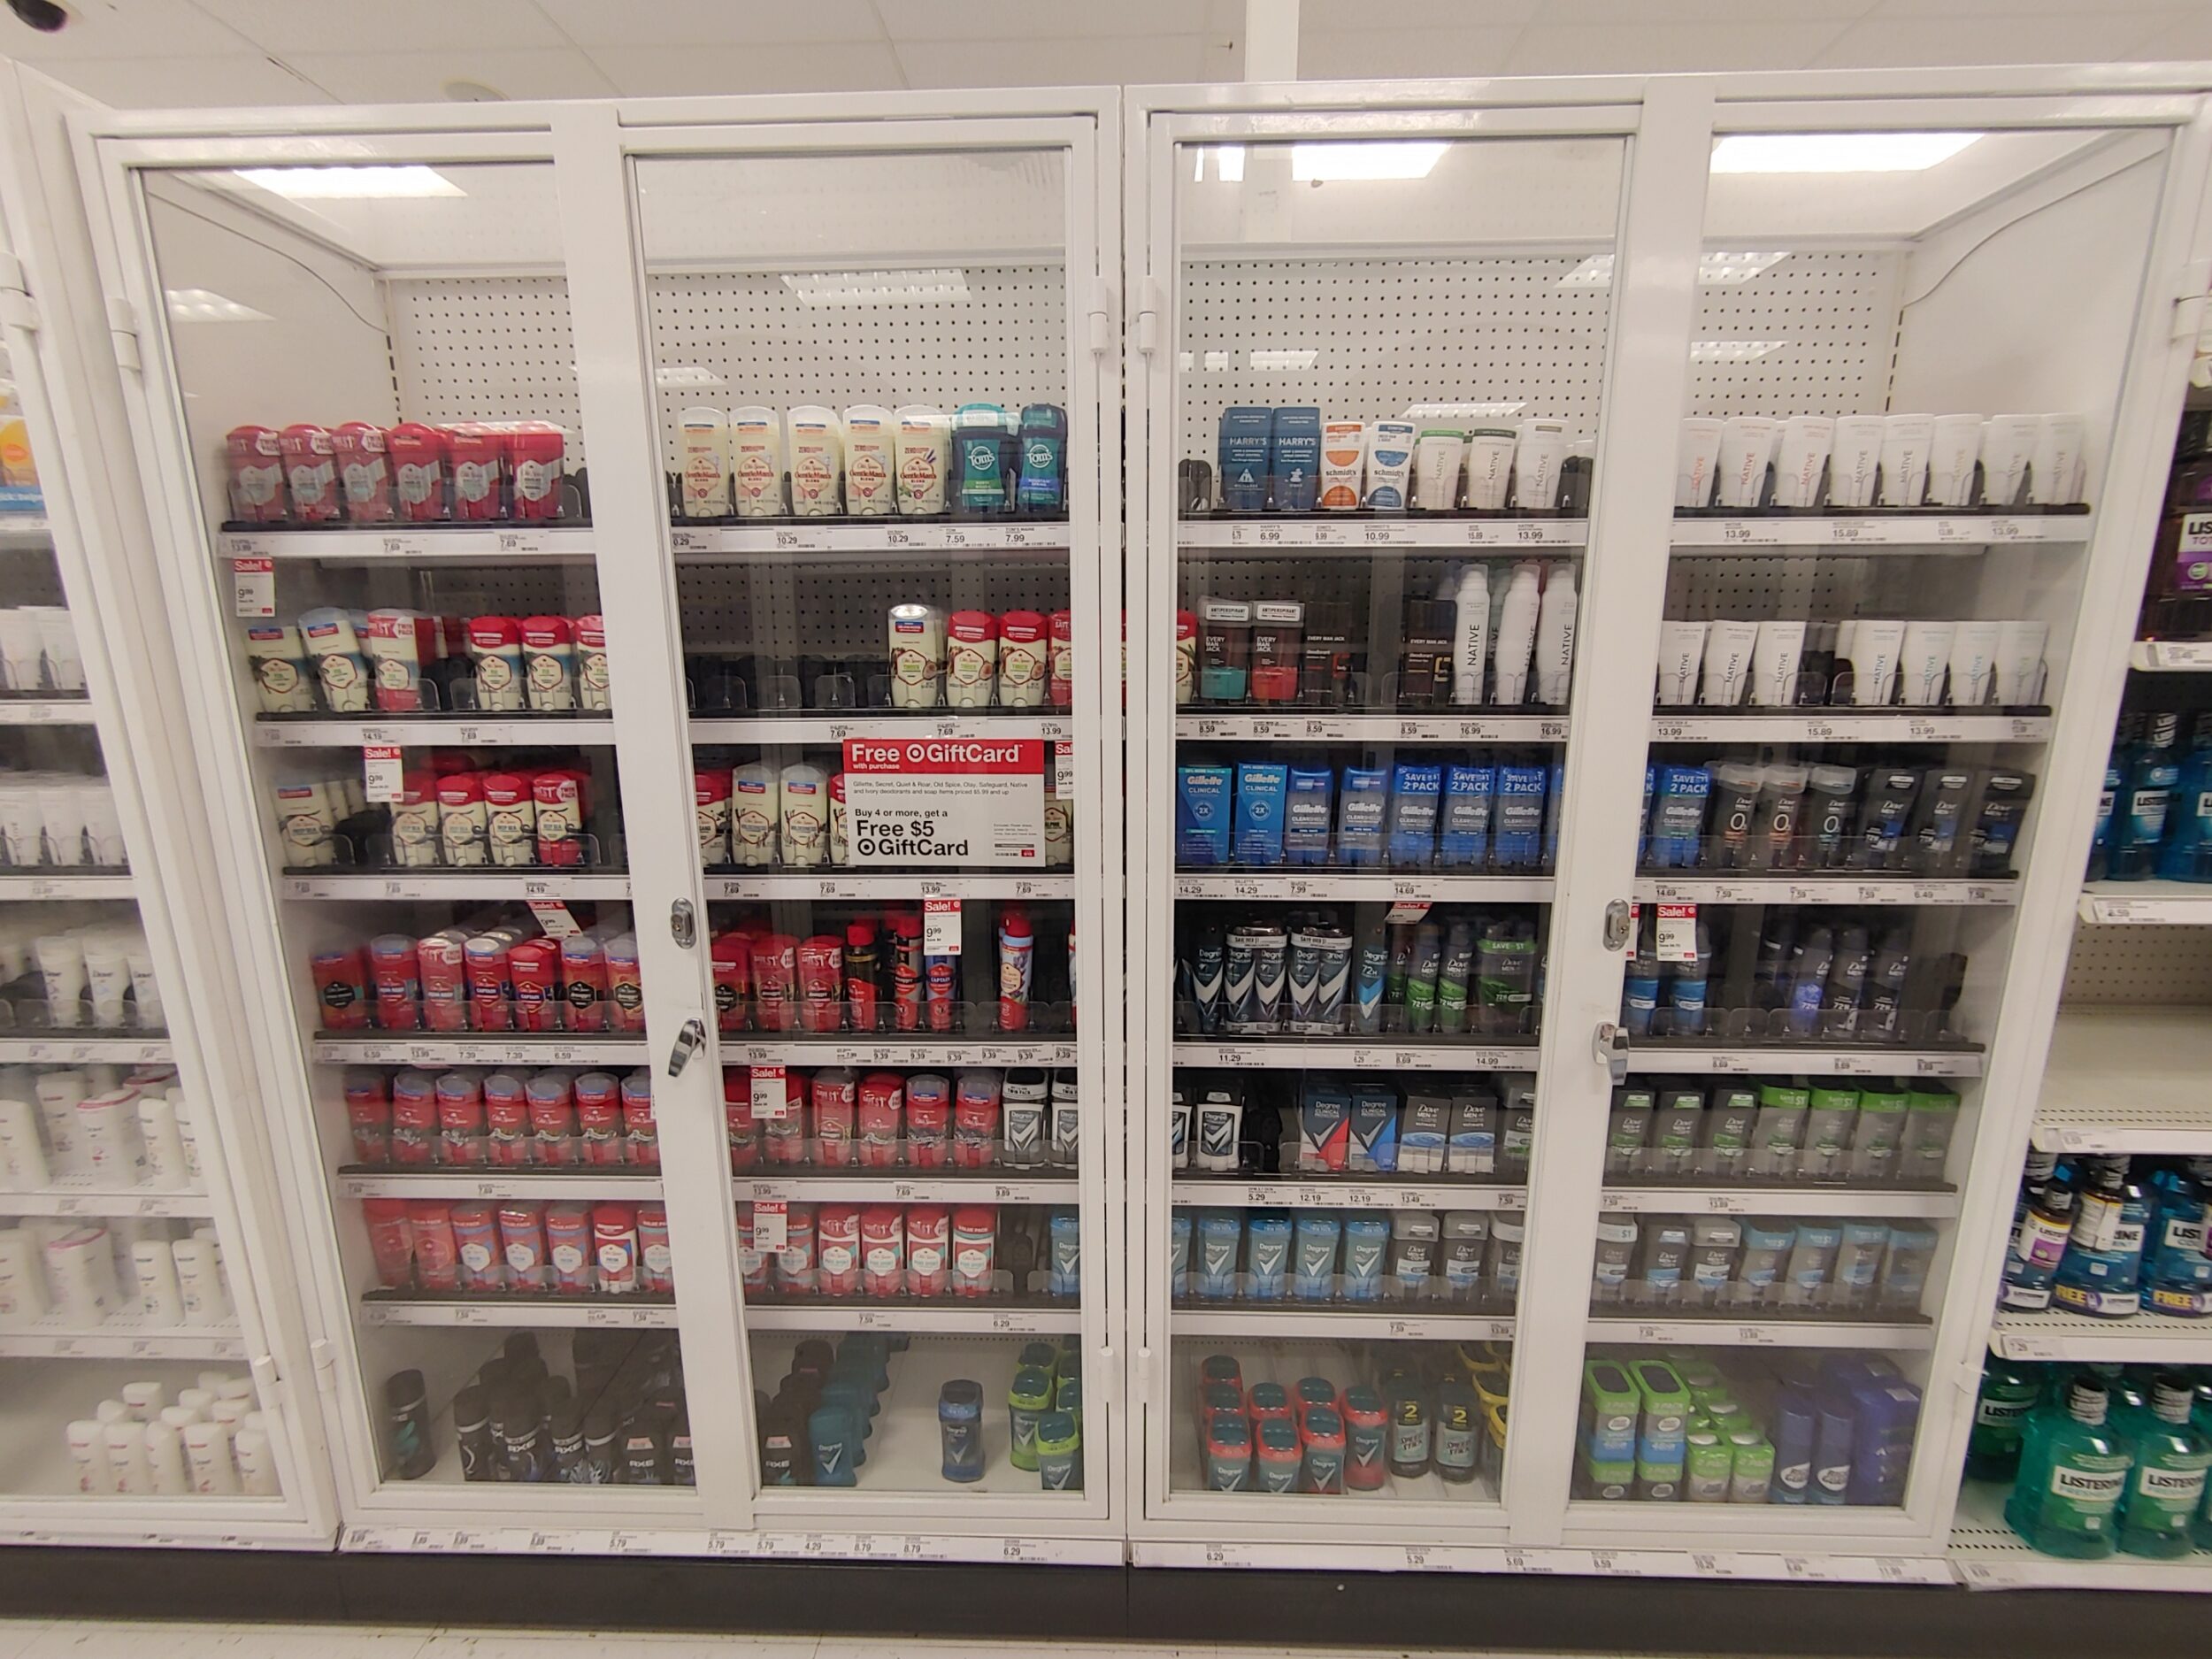 items are locked behind plexiglass in a department store